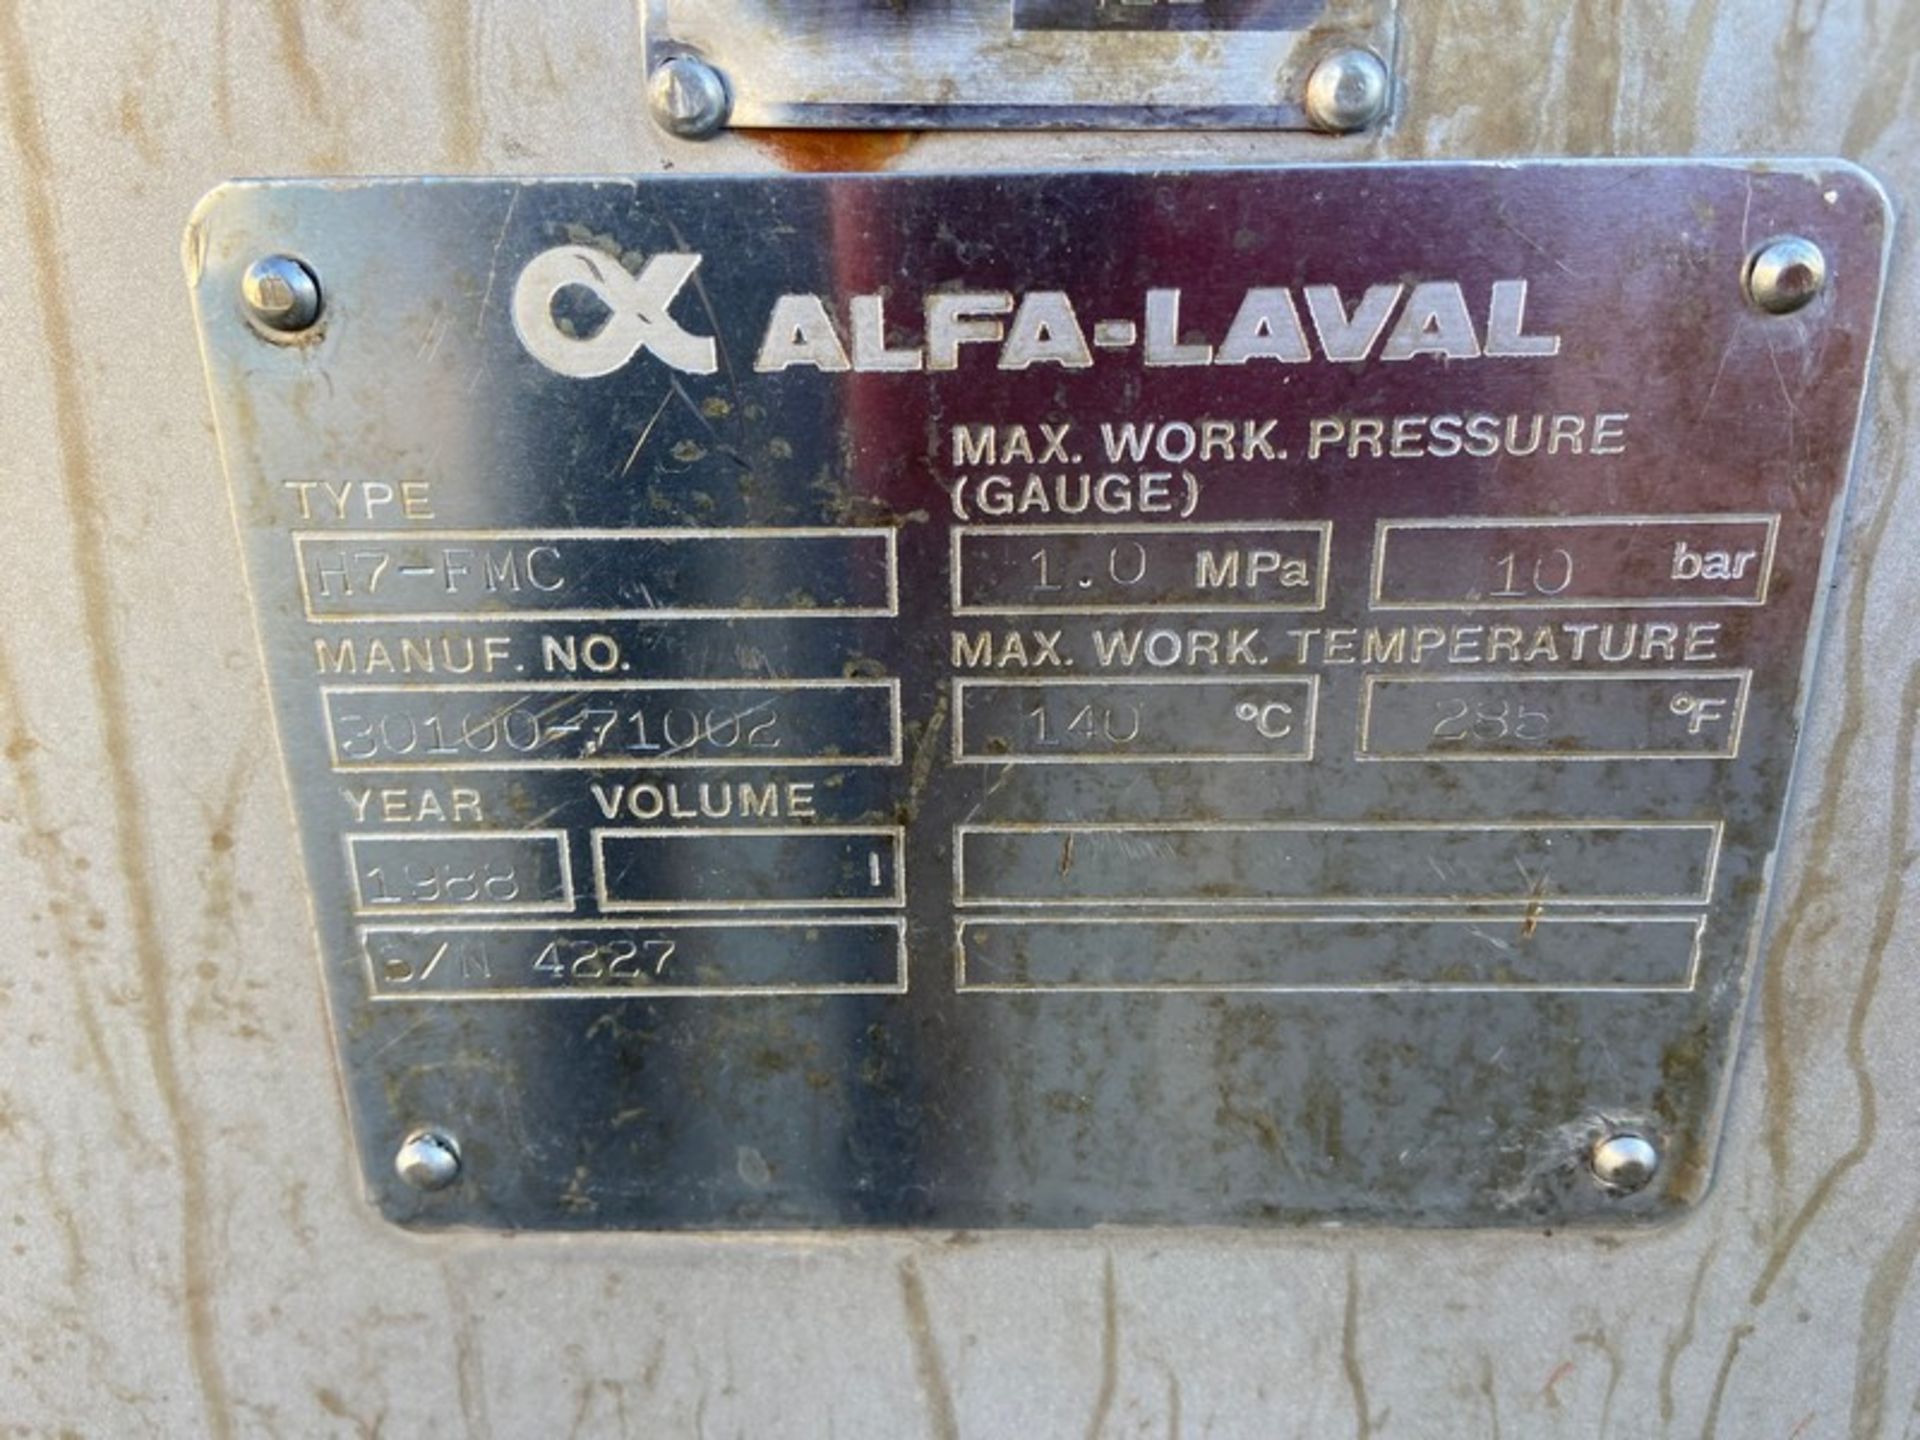 Alfa-Laval 4-Section Plate Press Heat Exchanger,-Type H7-FMC, S/N 4227, Max. Work Pressure 1.0 - Image 5 of 6